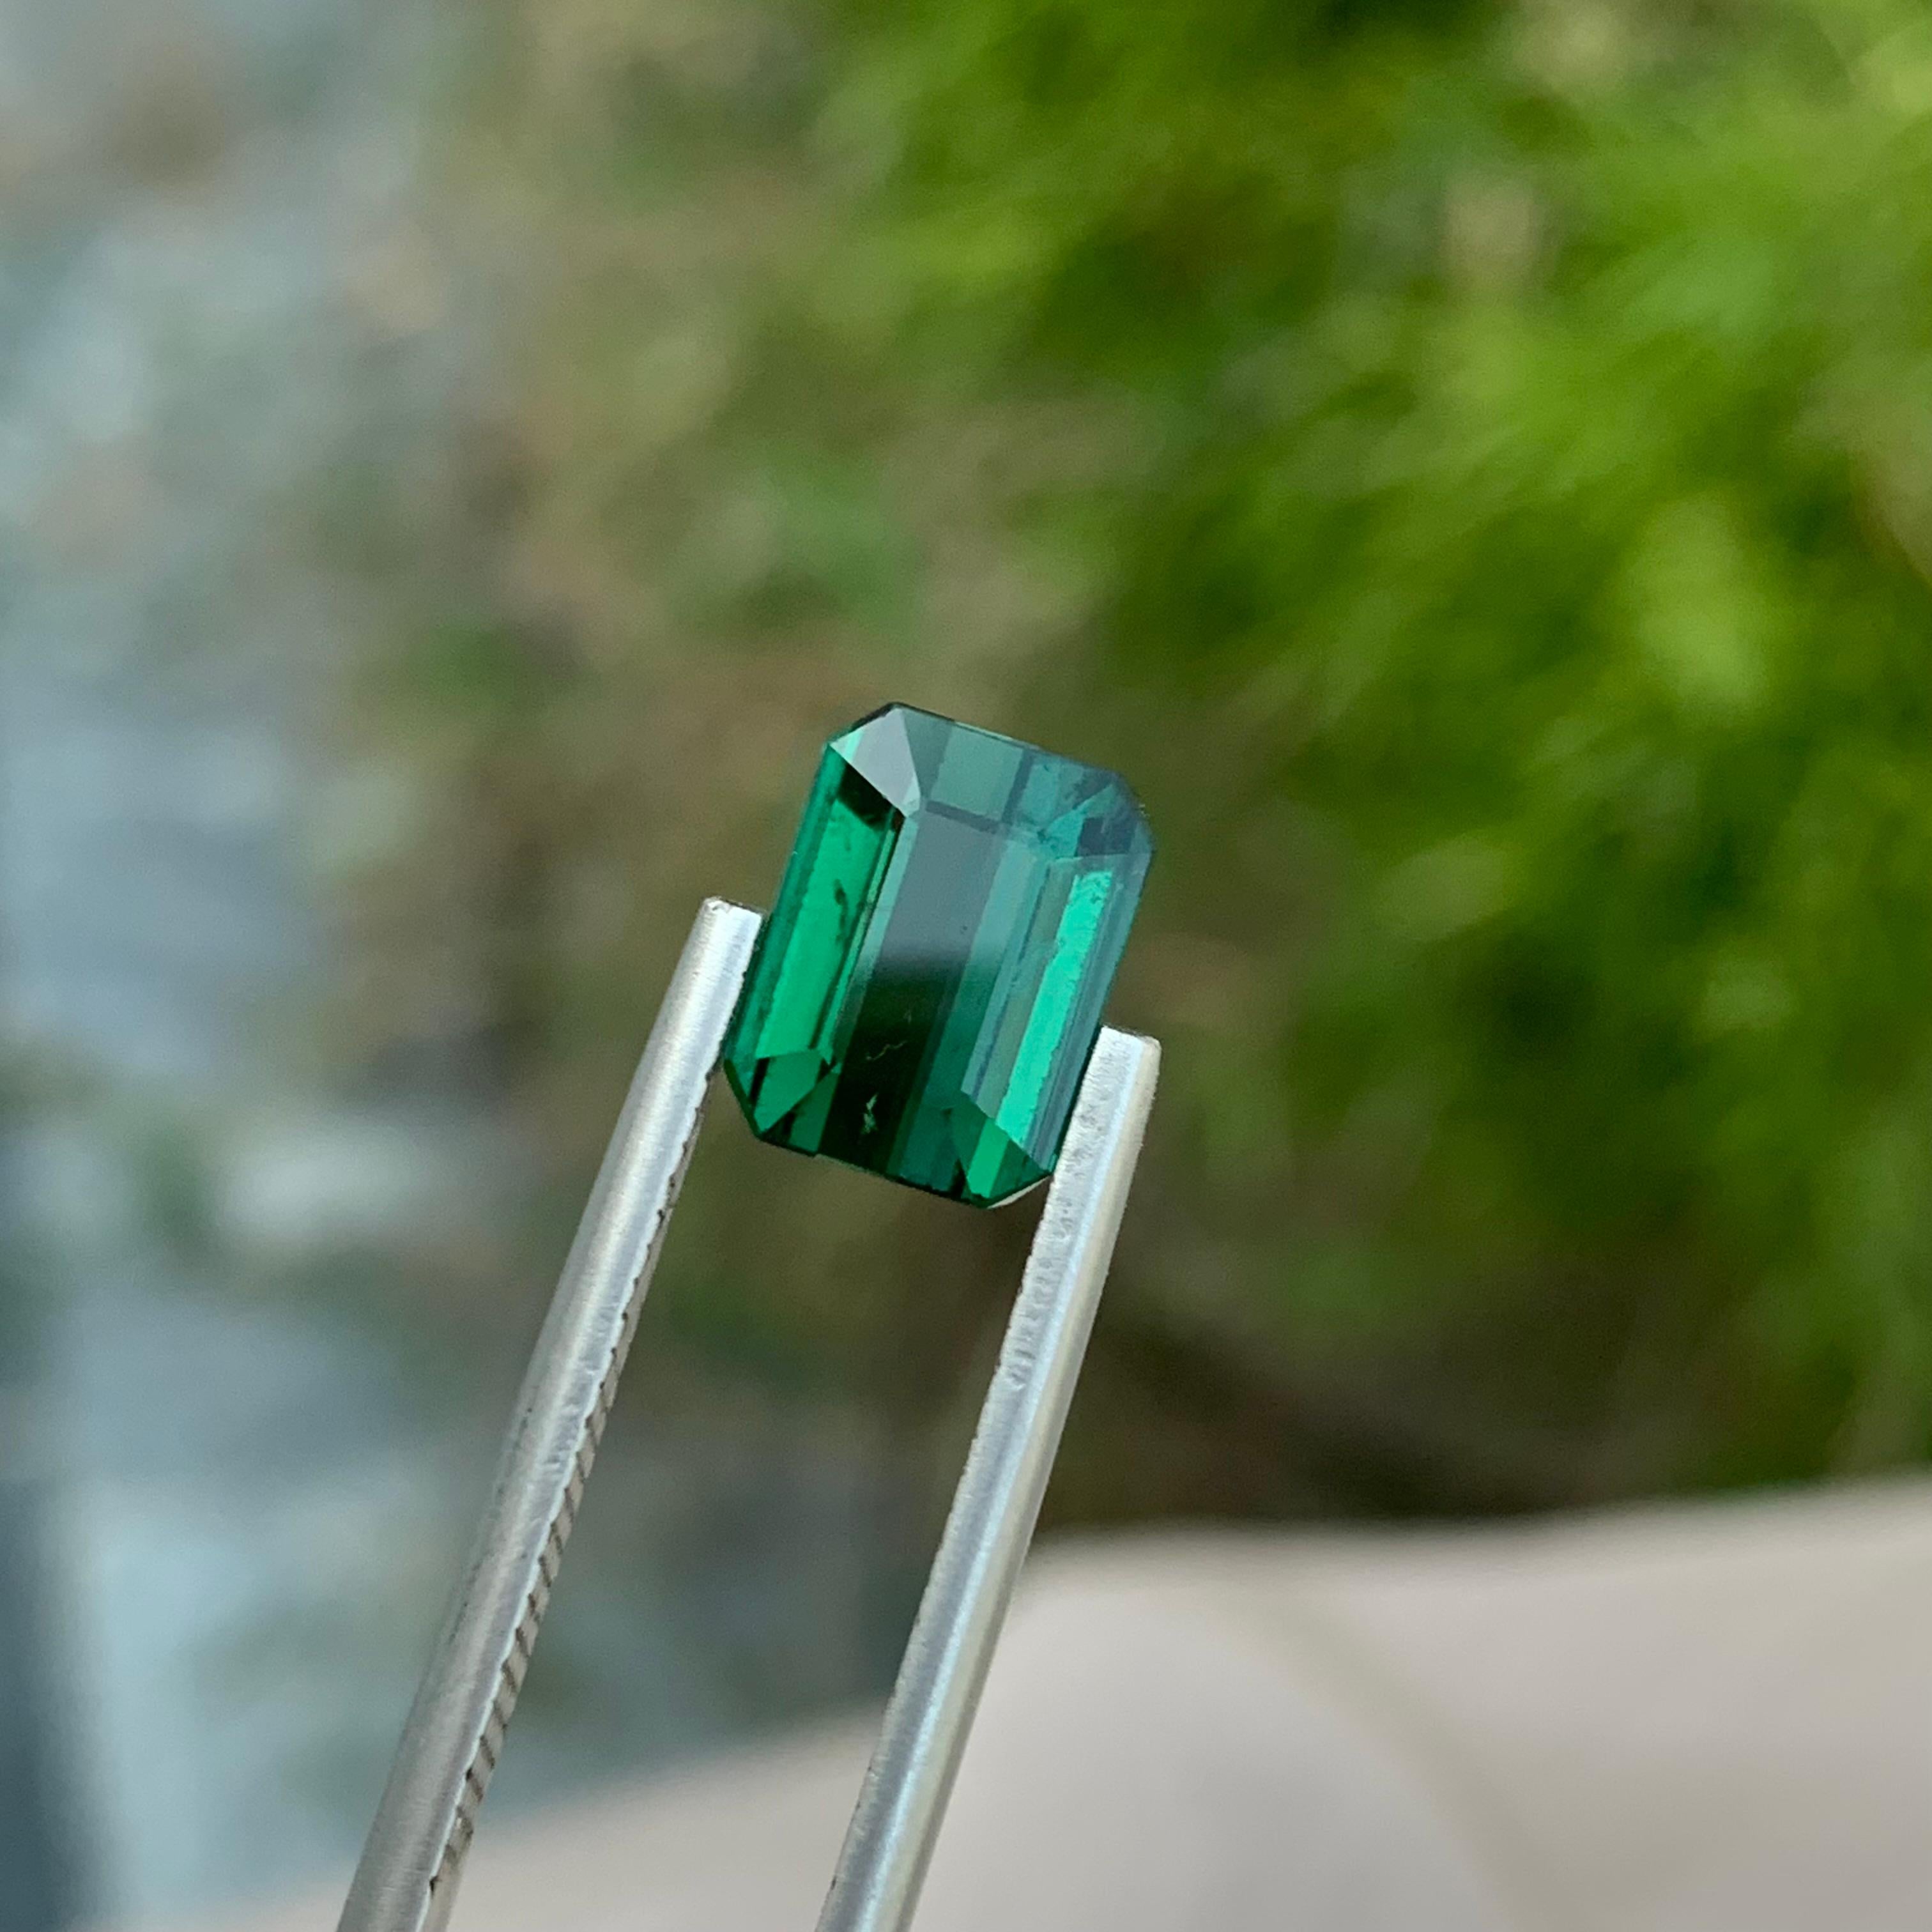 Arts and Crafts 2.85 Carat Natural Loose Green Tourmaline Emerald Shape Gem From Earth Mine For Sale